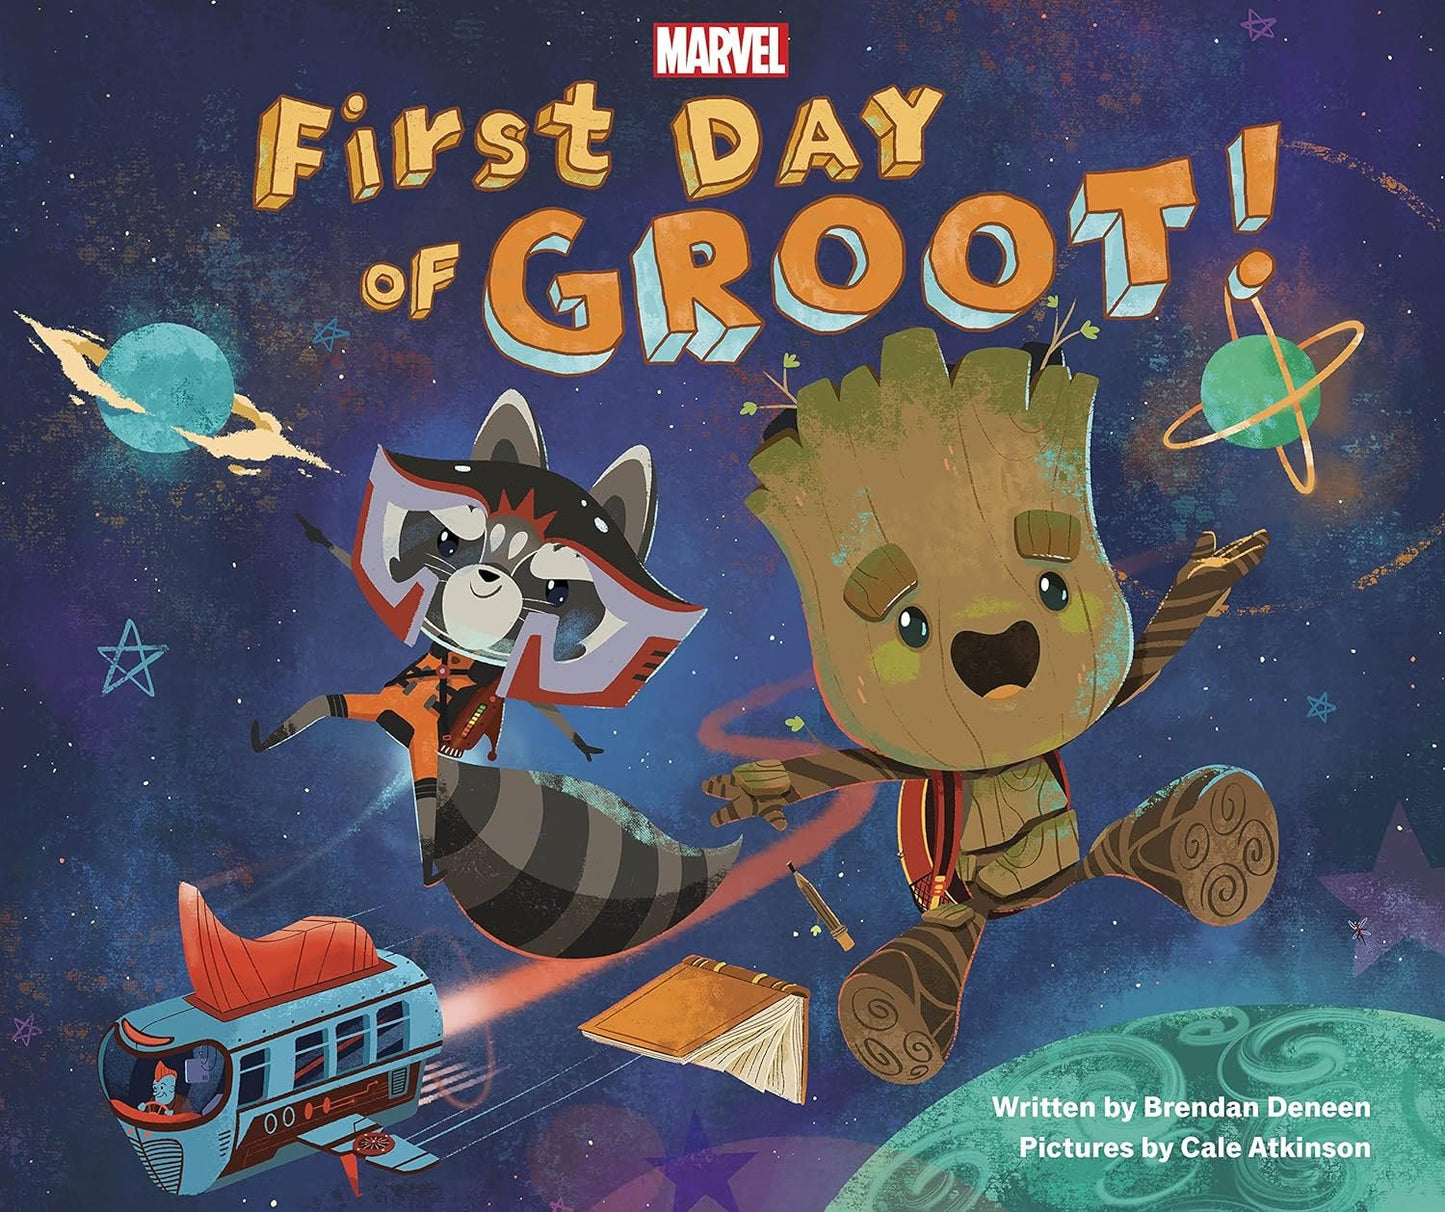 First Day of Groot! (The Adventures of Rocket and Groot)